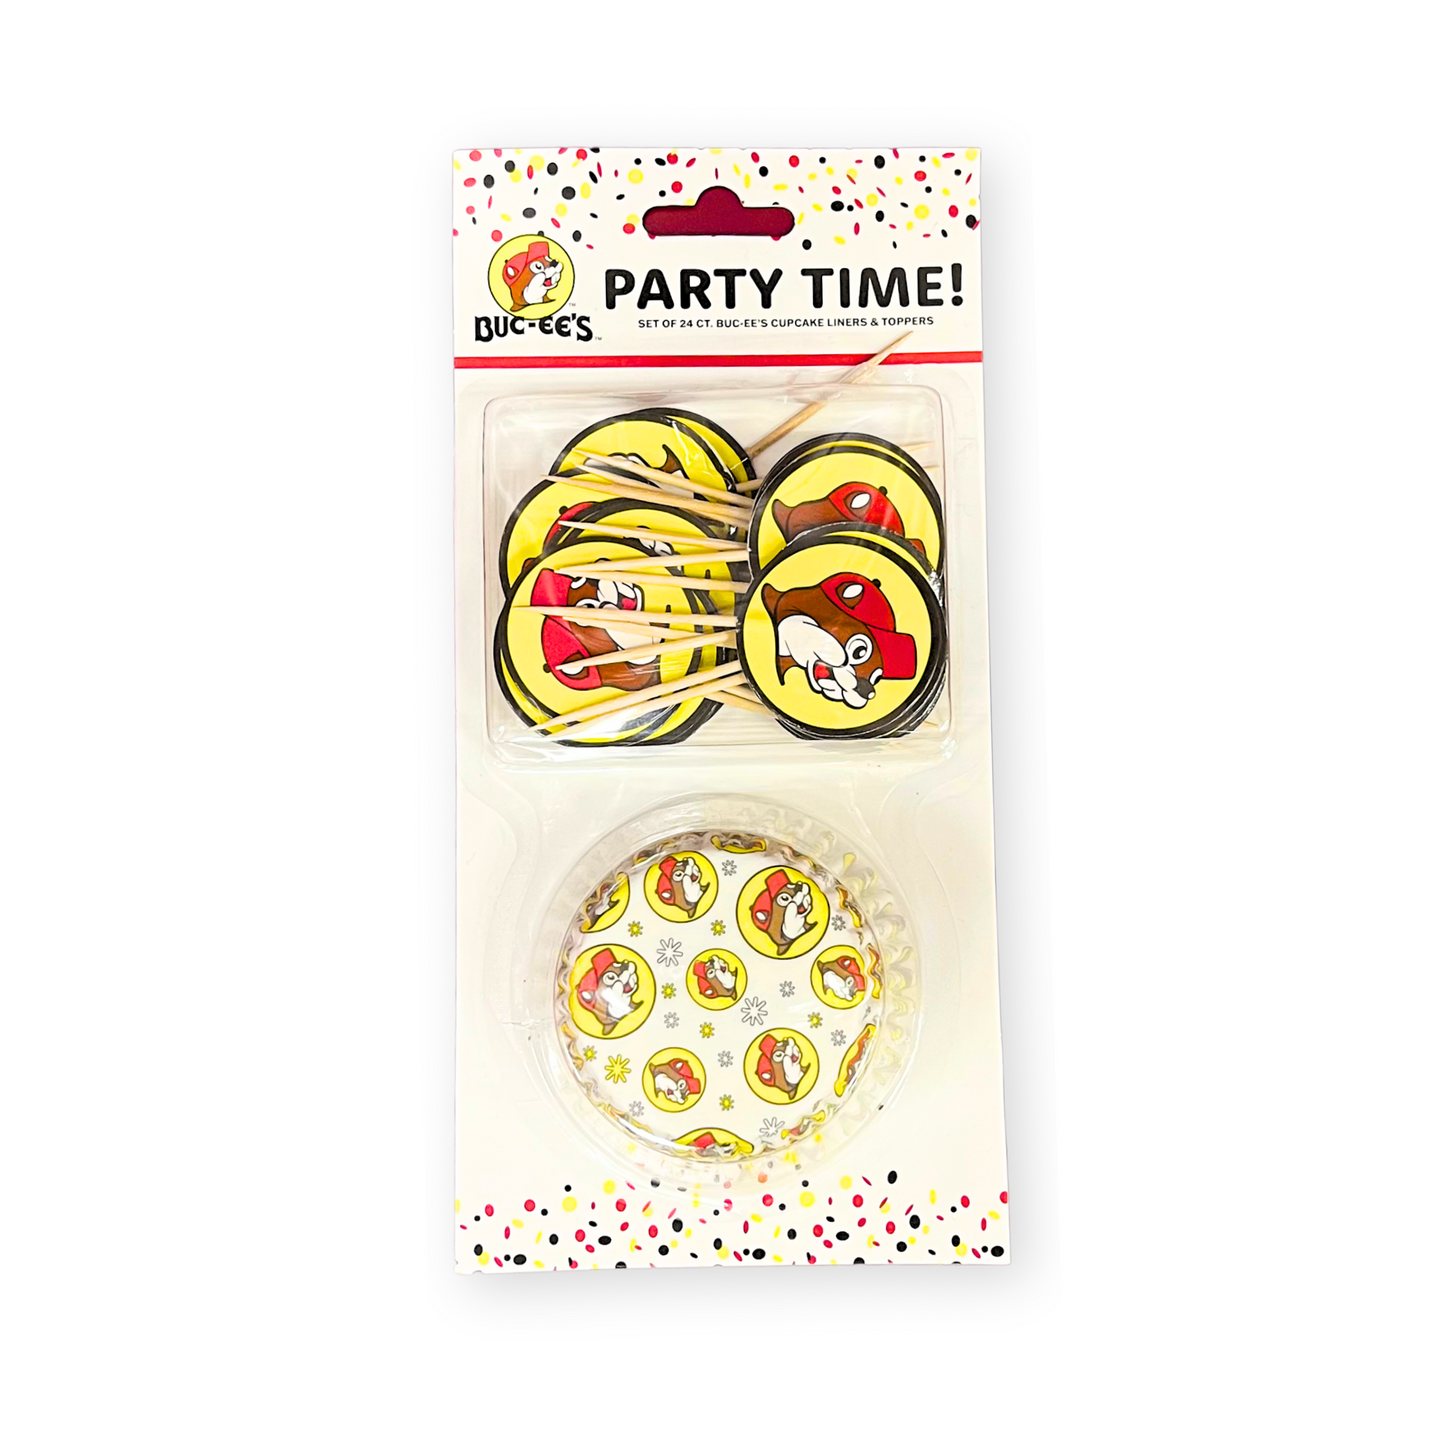 Buc-ee's Party Cupcake Liners & Toppers buc ees buc ee's bucees buccees buc-ees